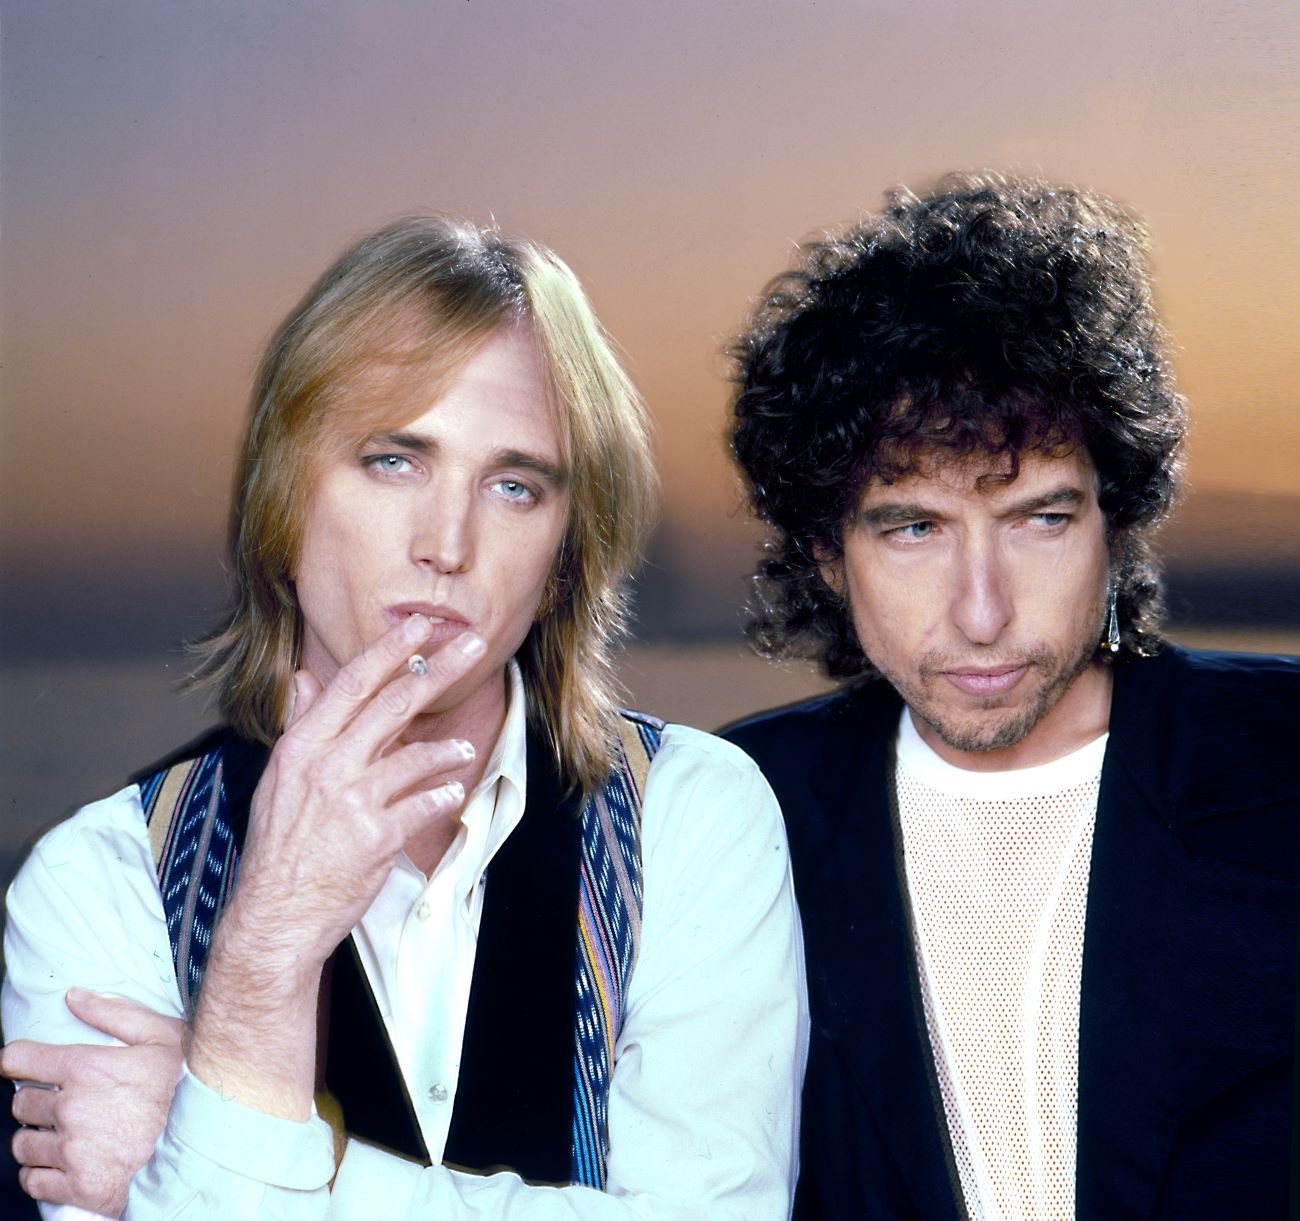 Tom Petty and Bob Dylan stand in front of a sunset background. Petty holds a cigarette.